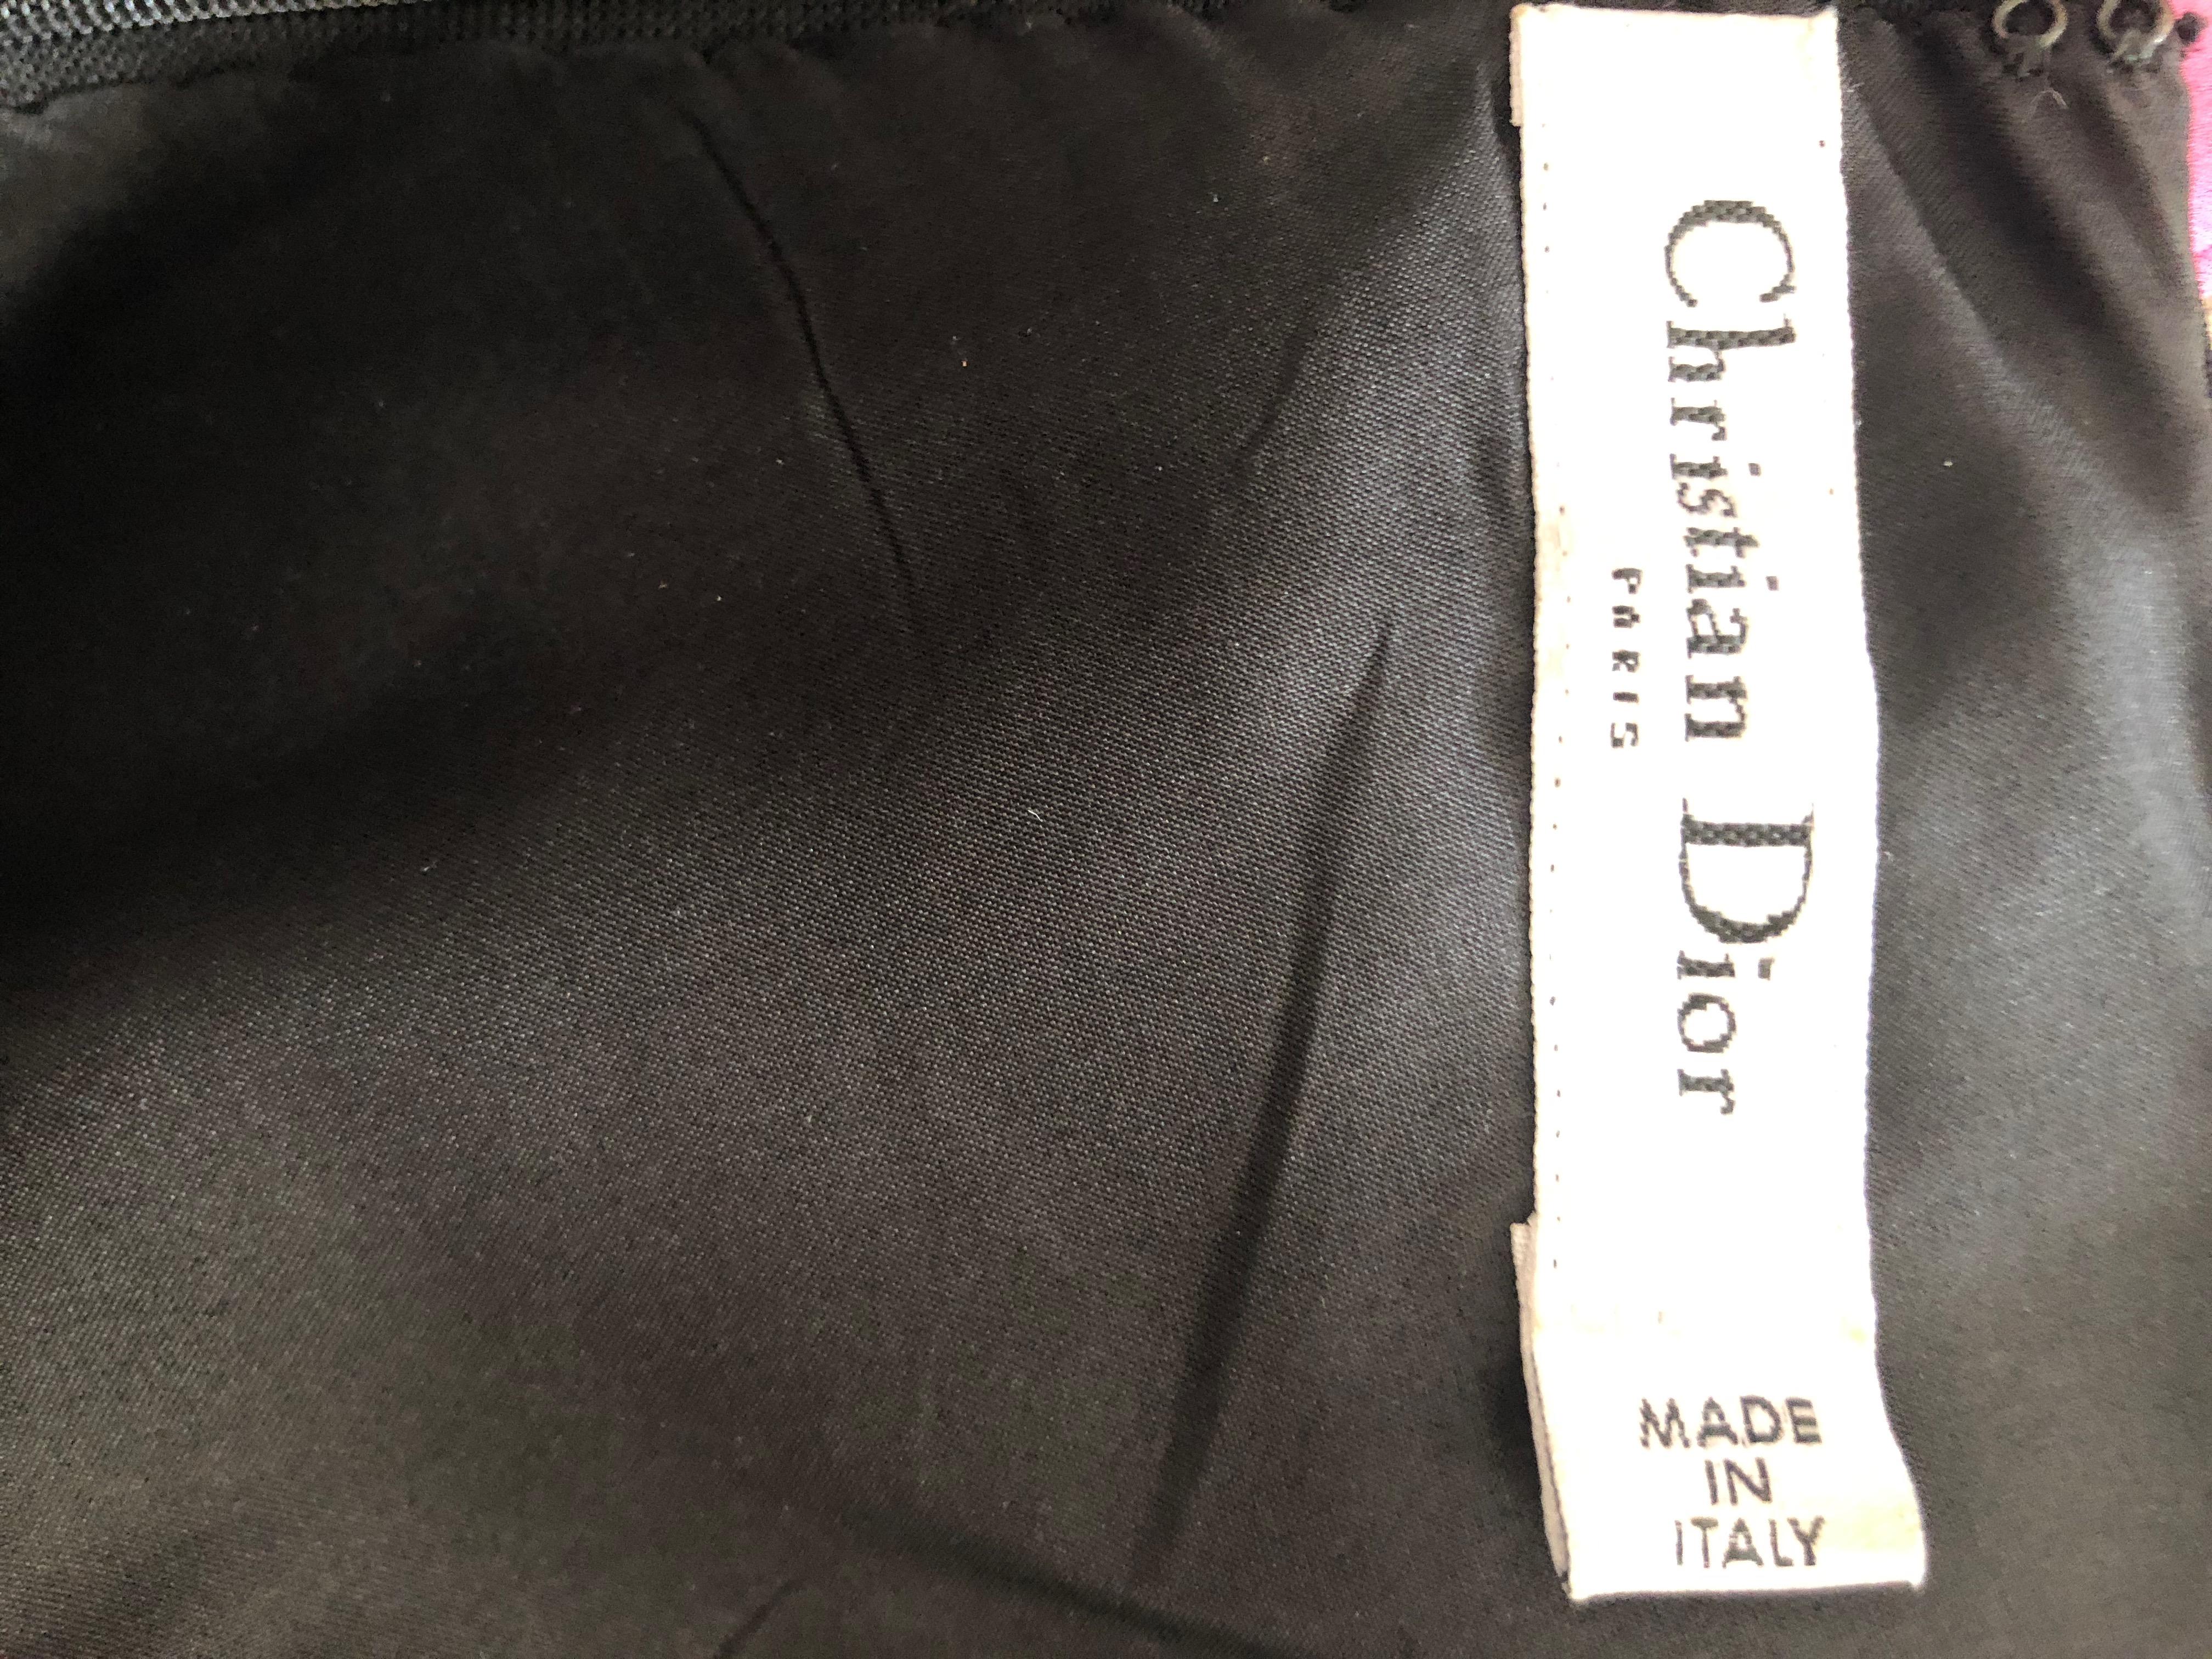 Christian Dior by John Galliano Black Jewel Embellished Cocktail Dress For Sale 6